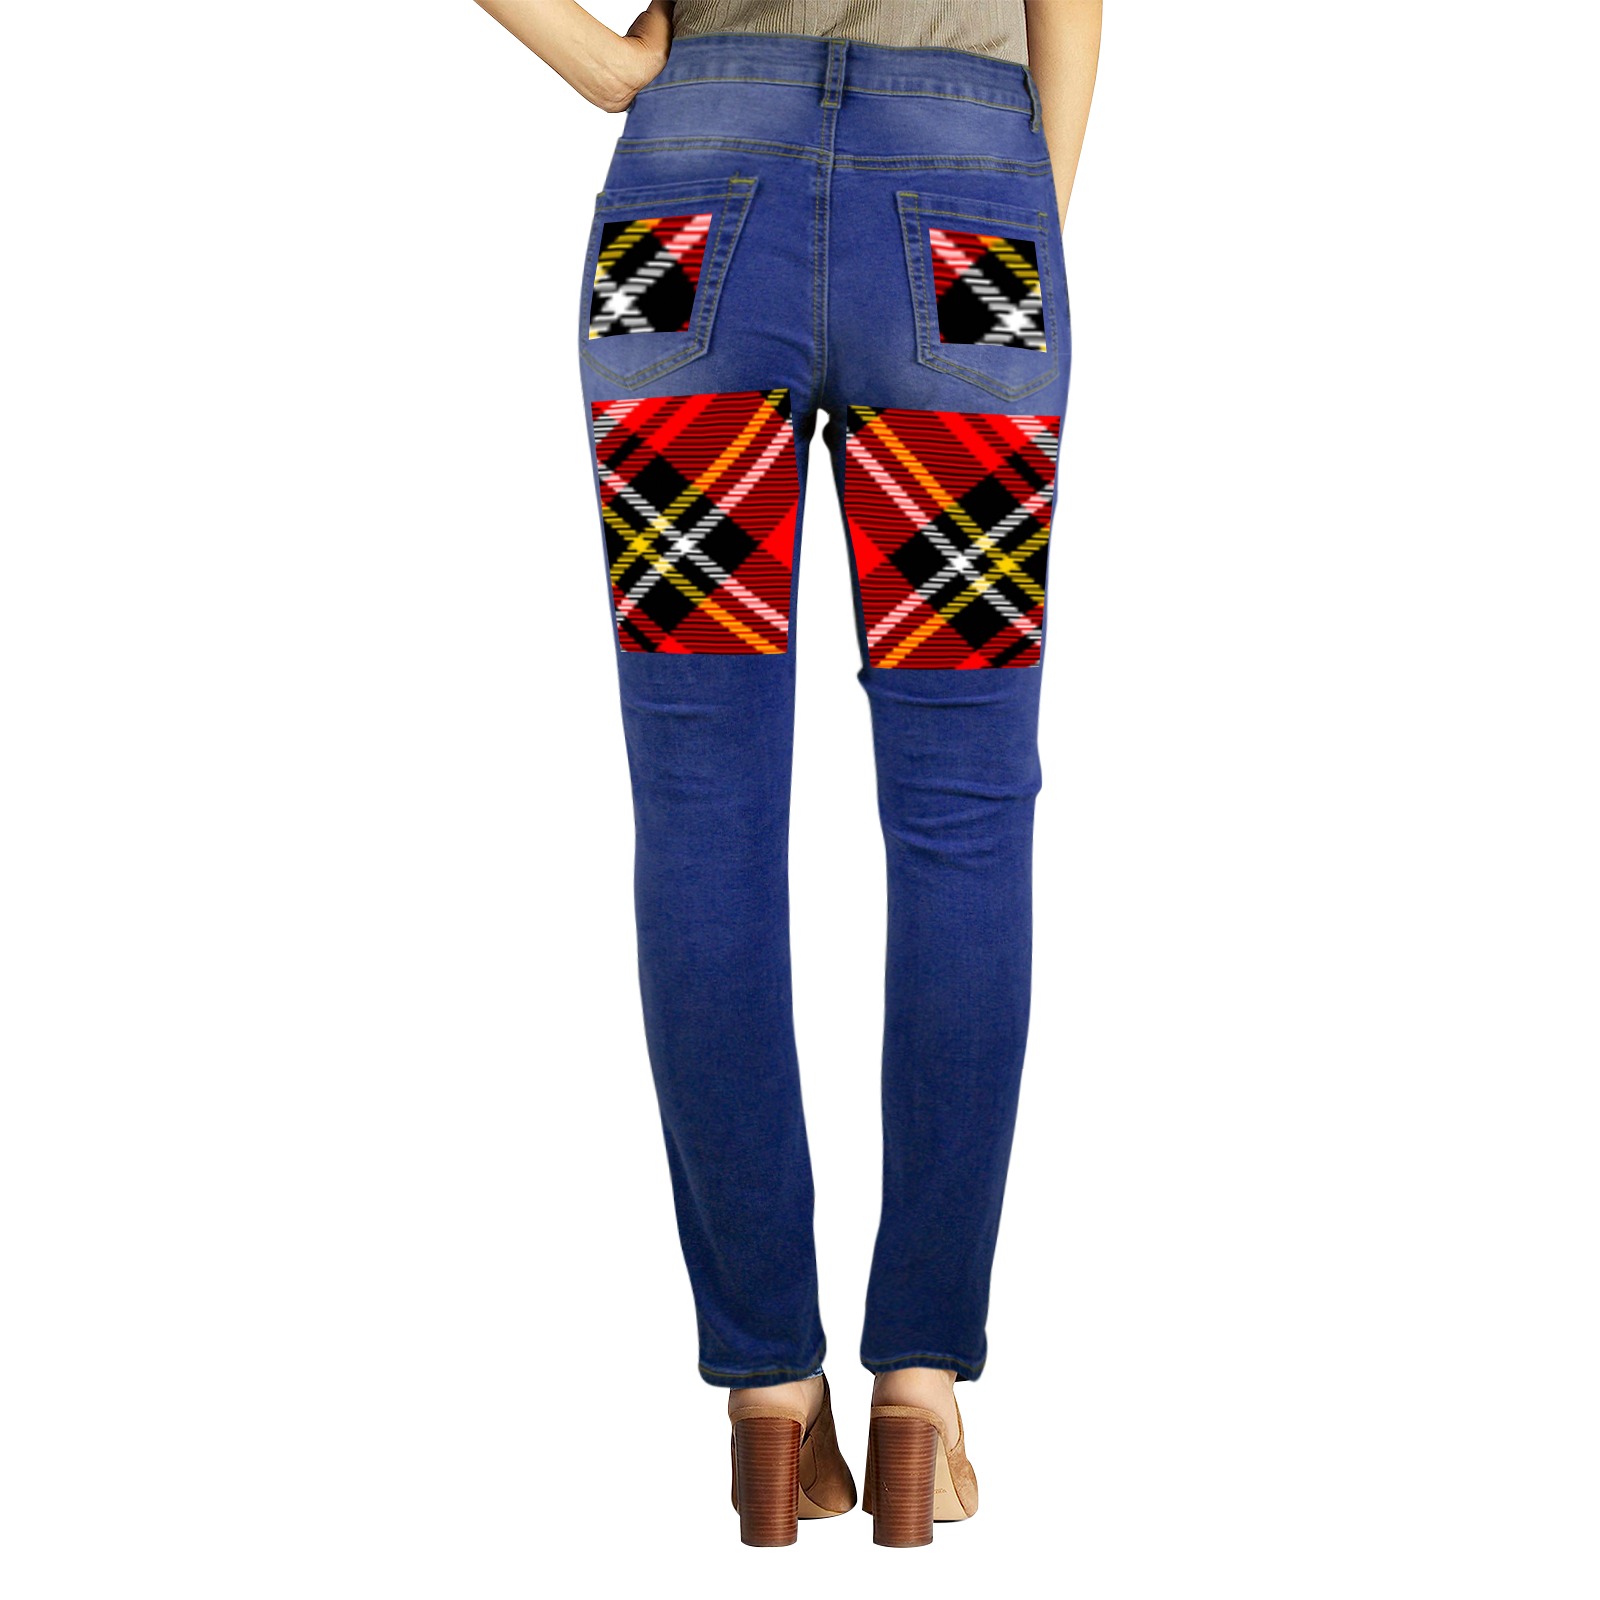 Plaids 8 Women's Jeans (Front&Back Printing)